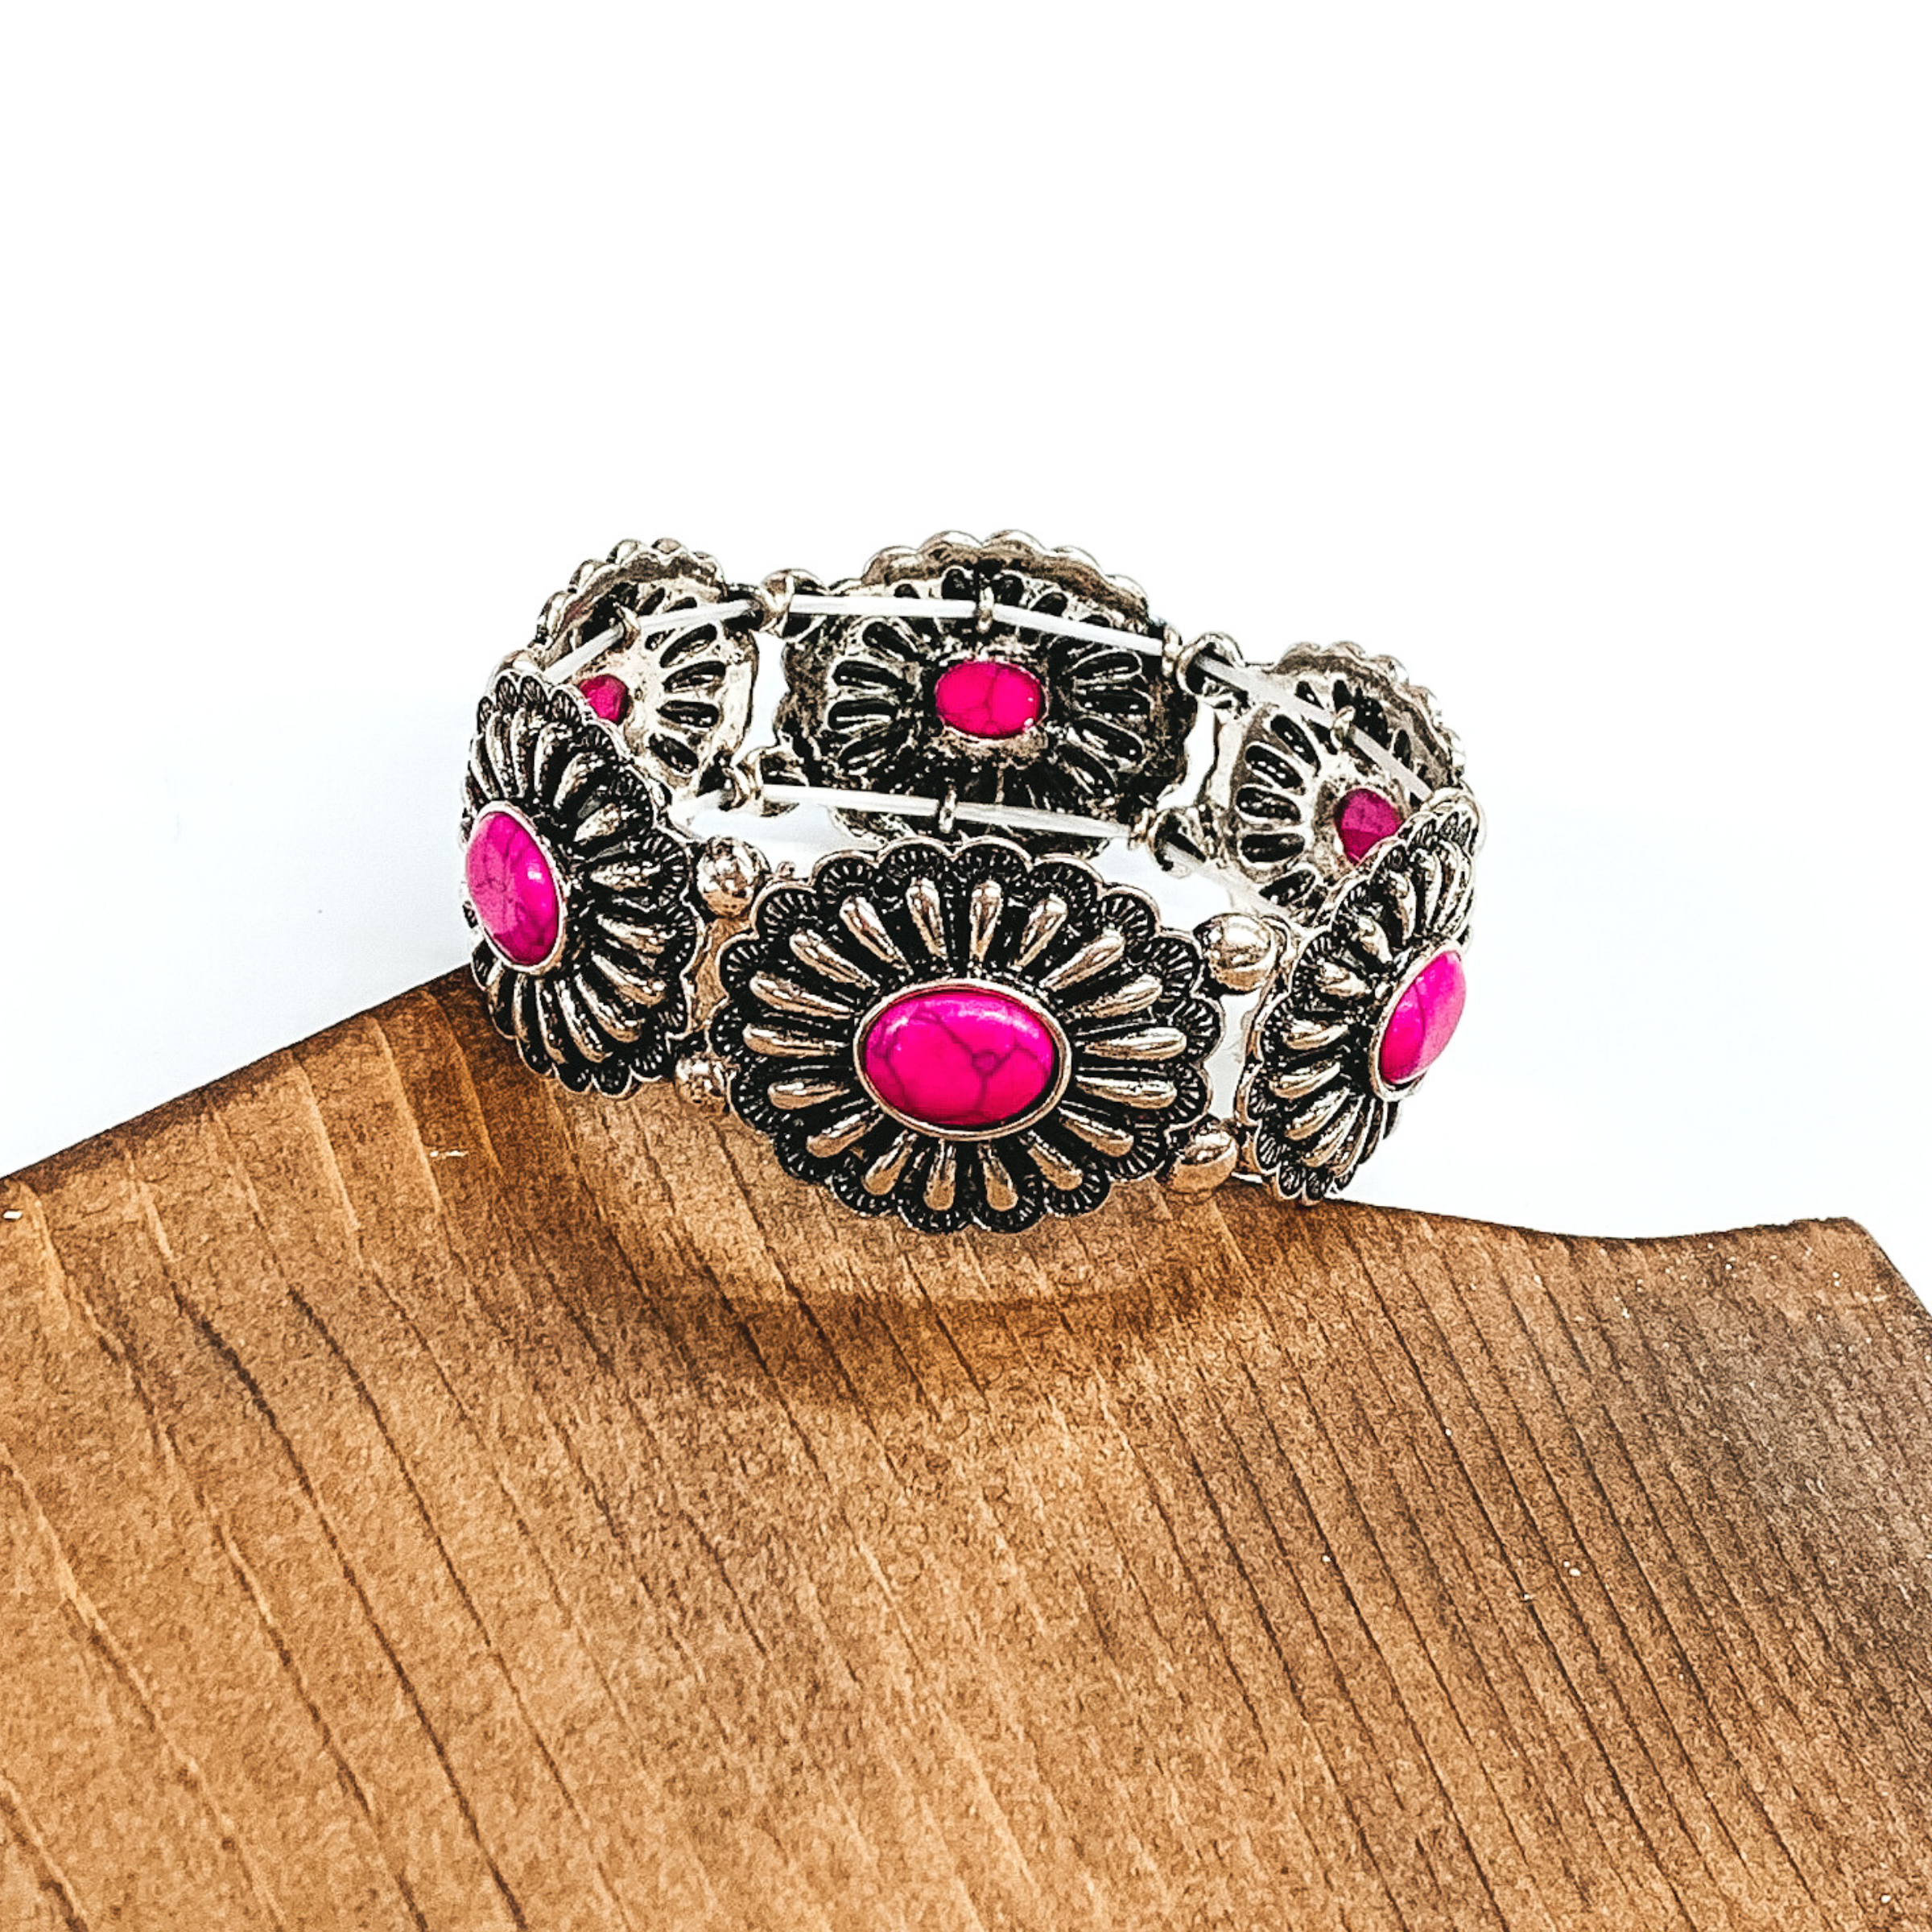 Silver, oval concho stretchy bracelet with oval center stones in pink. This bracelet is pictured partially laying on a piece of wood and on a white background.